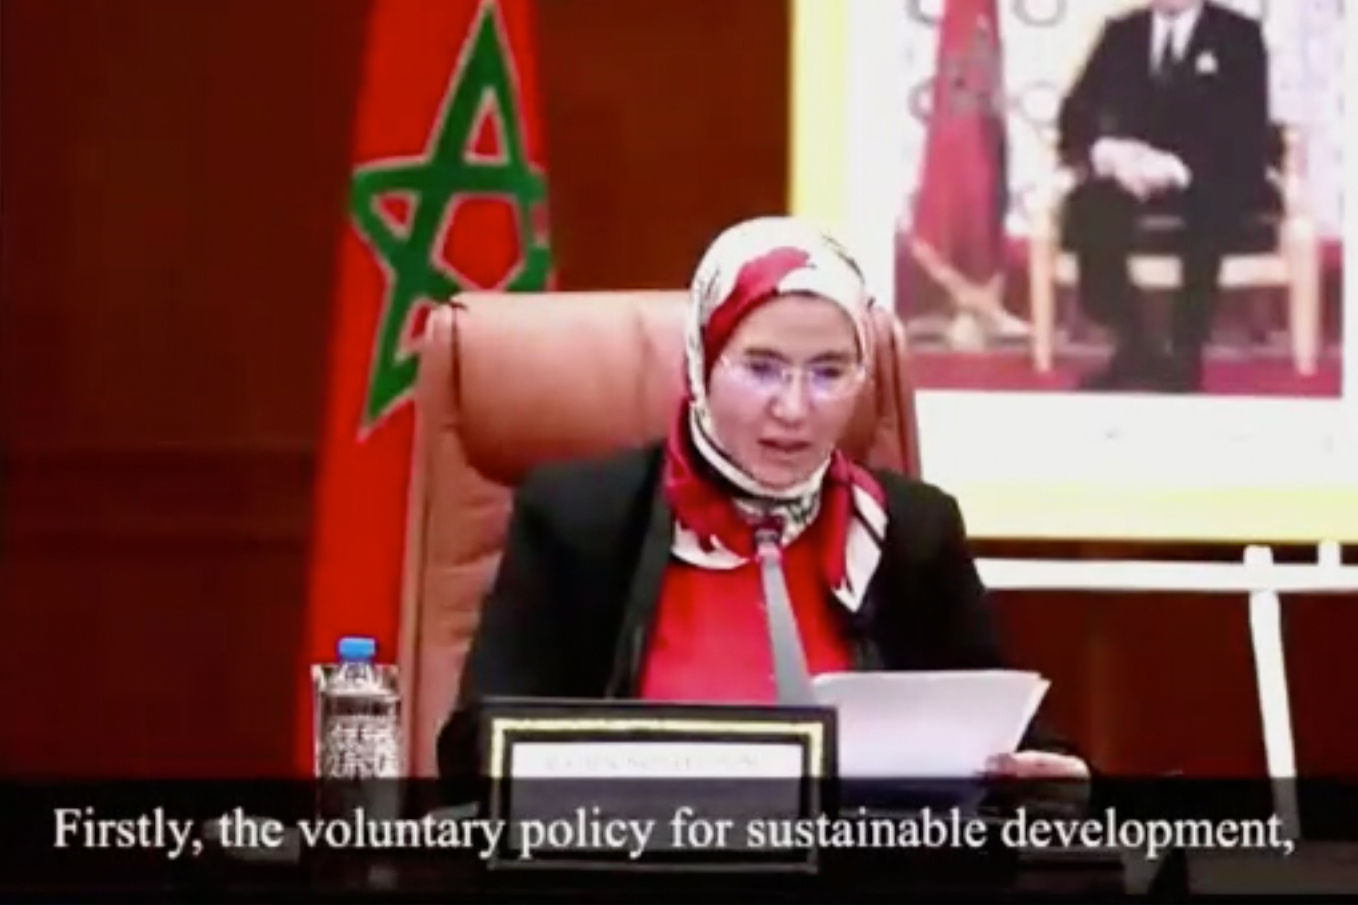 Nezha El Ouafi, Minister Delegate to the Minister of Foreign Affairs, African Cooperation, and Moroccan Expatriates, Morocco